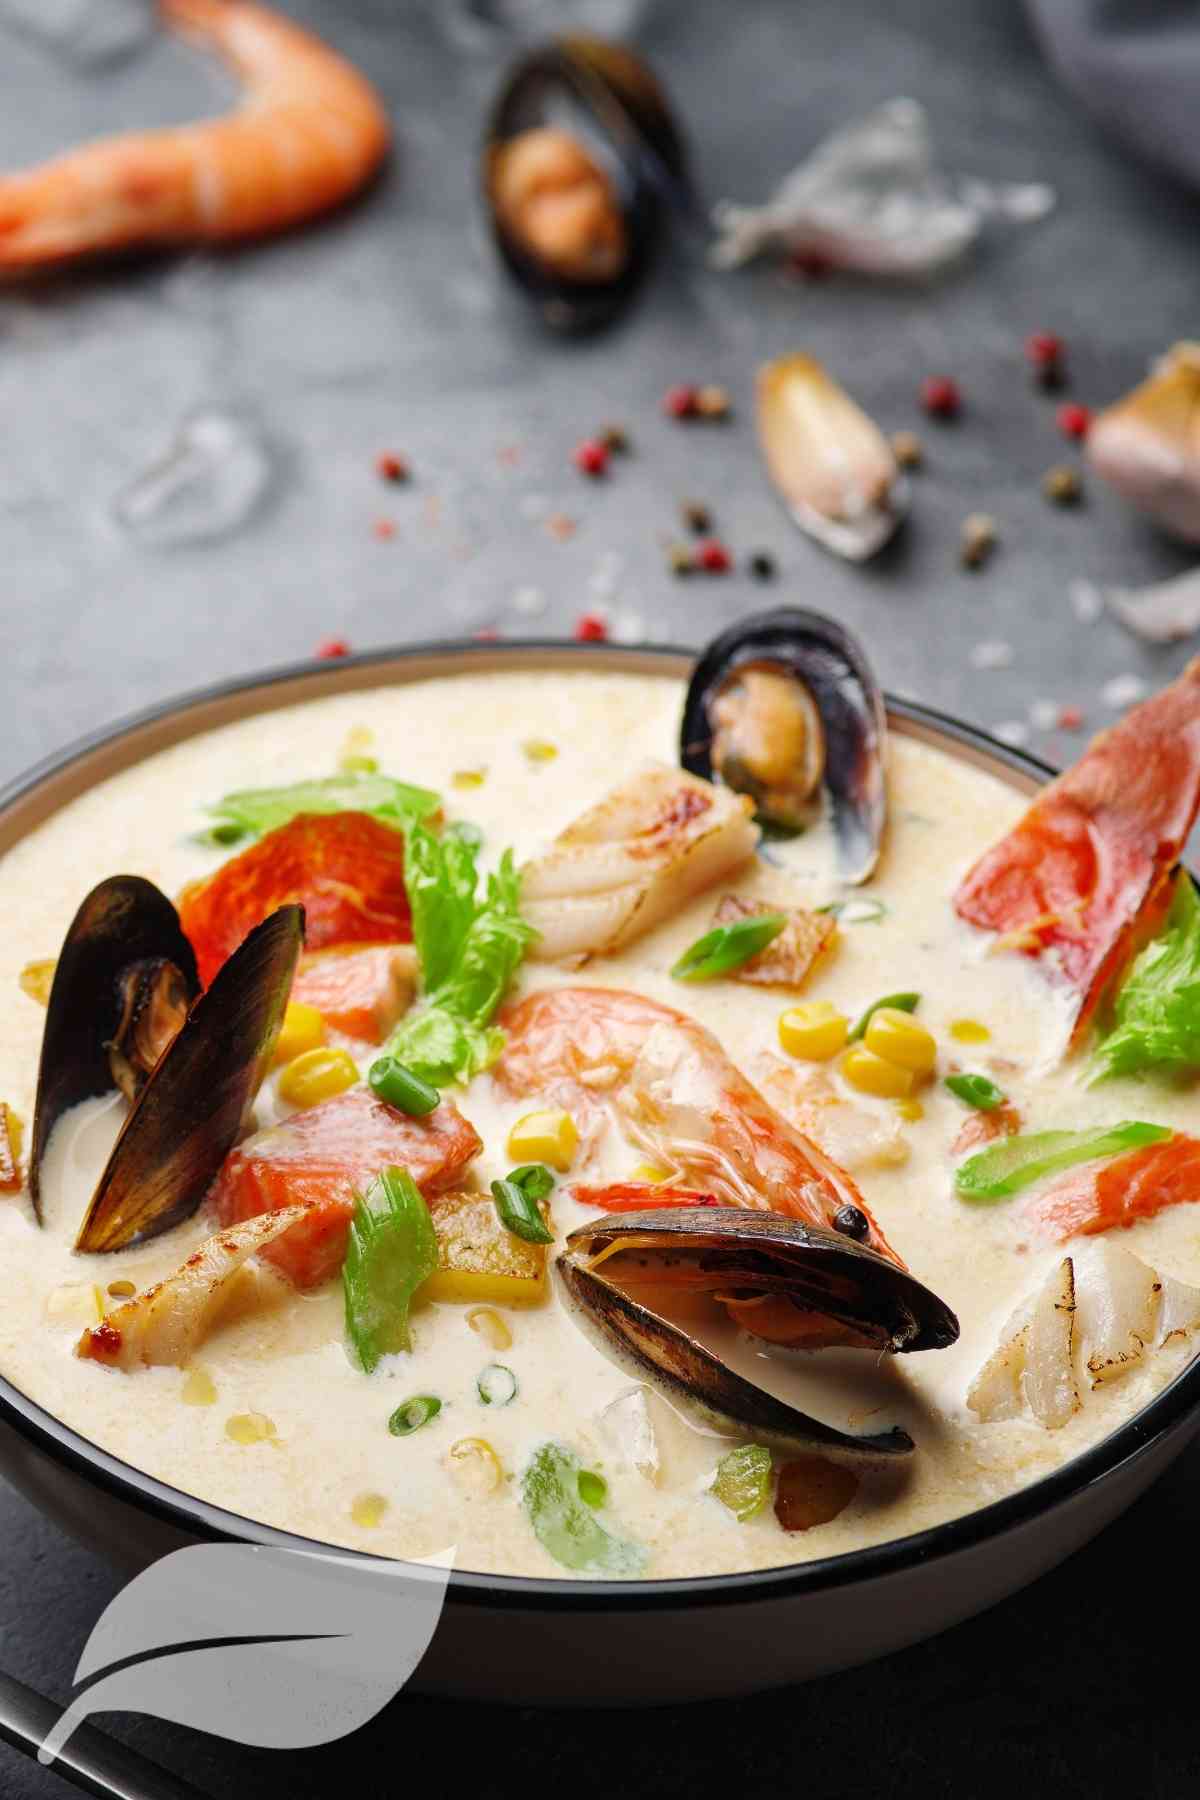 Fish chouder in a bowl with seafood showing